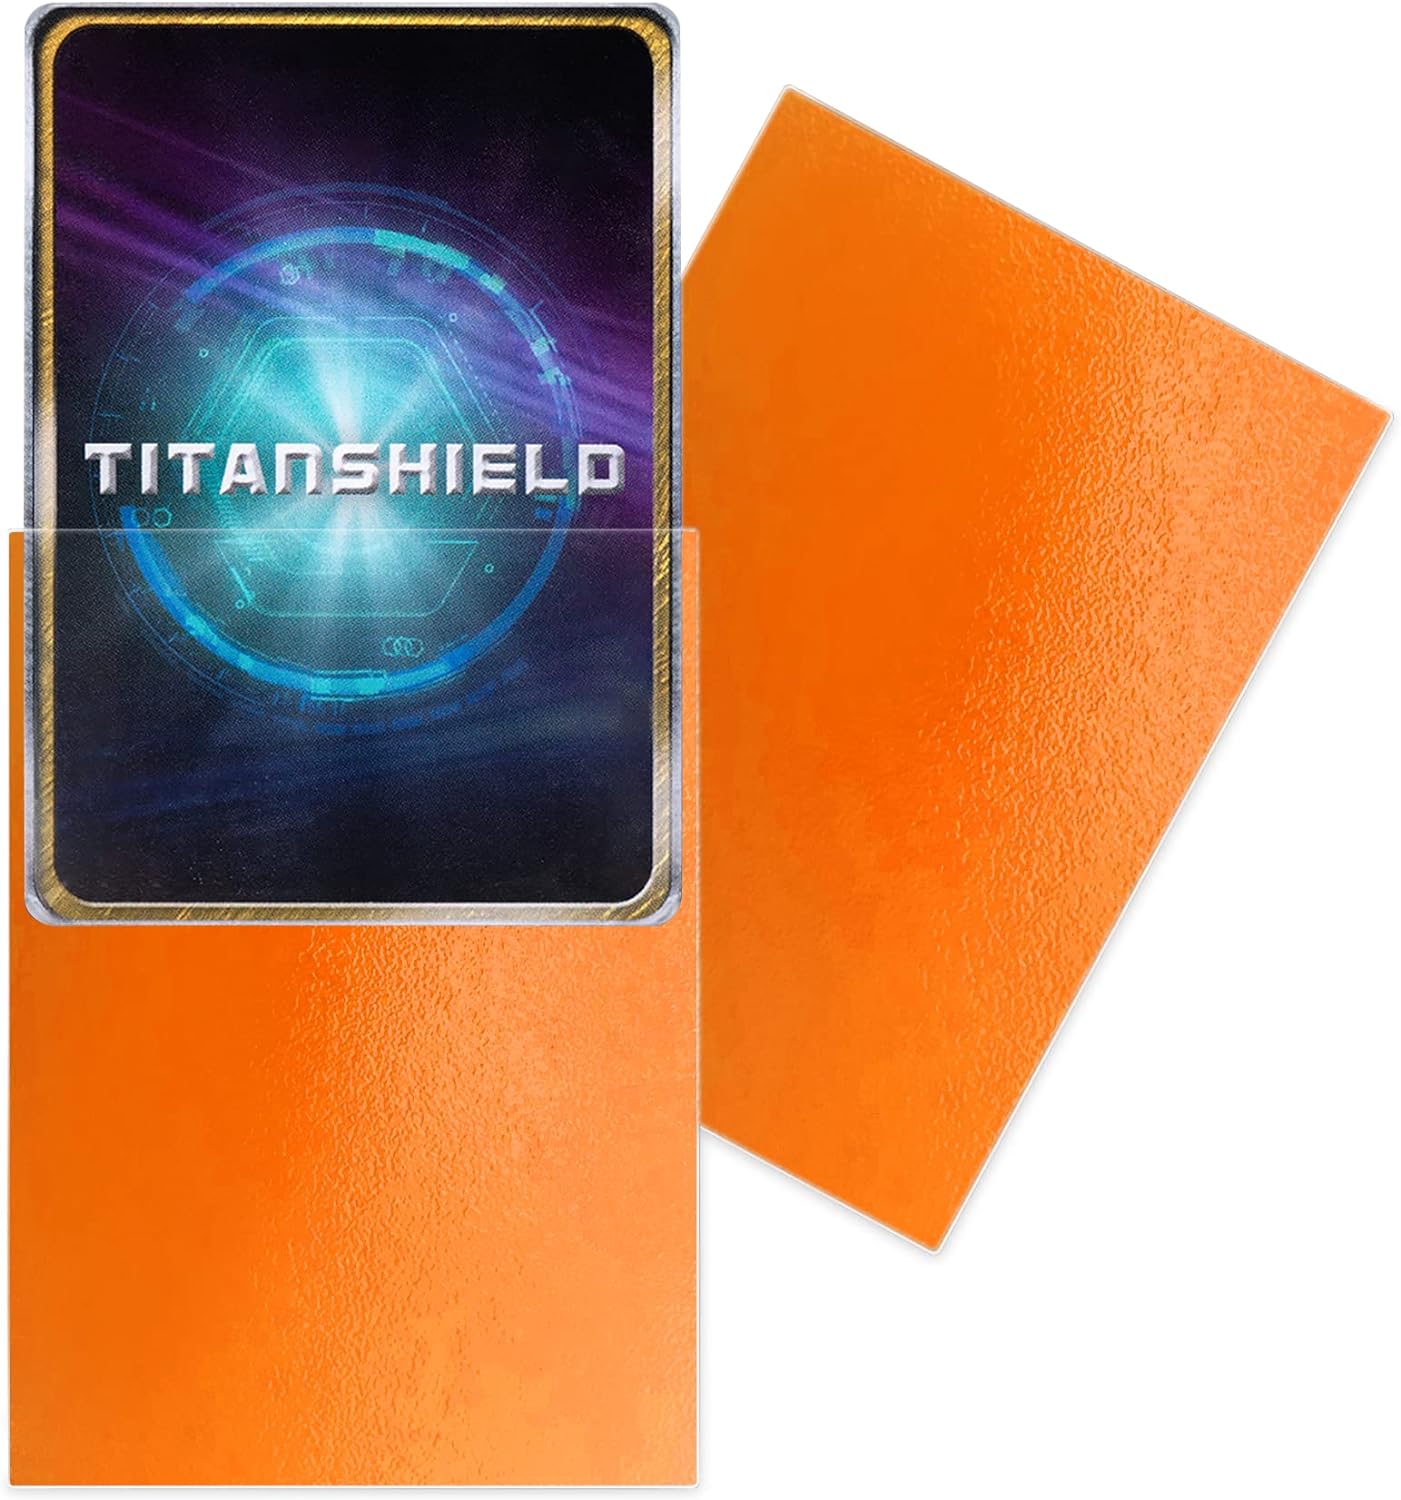 TitanShield Card Protection Sleeves